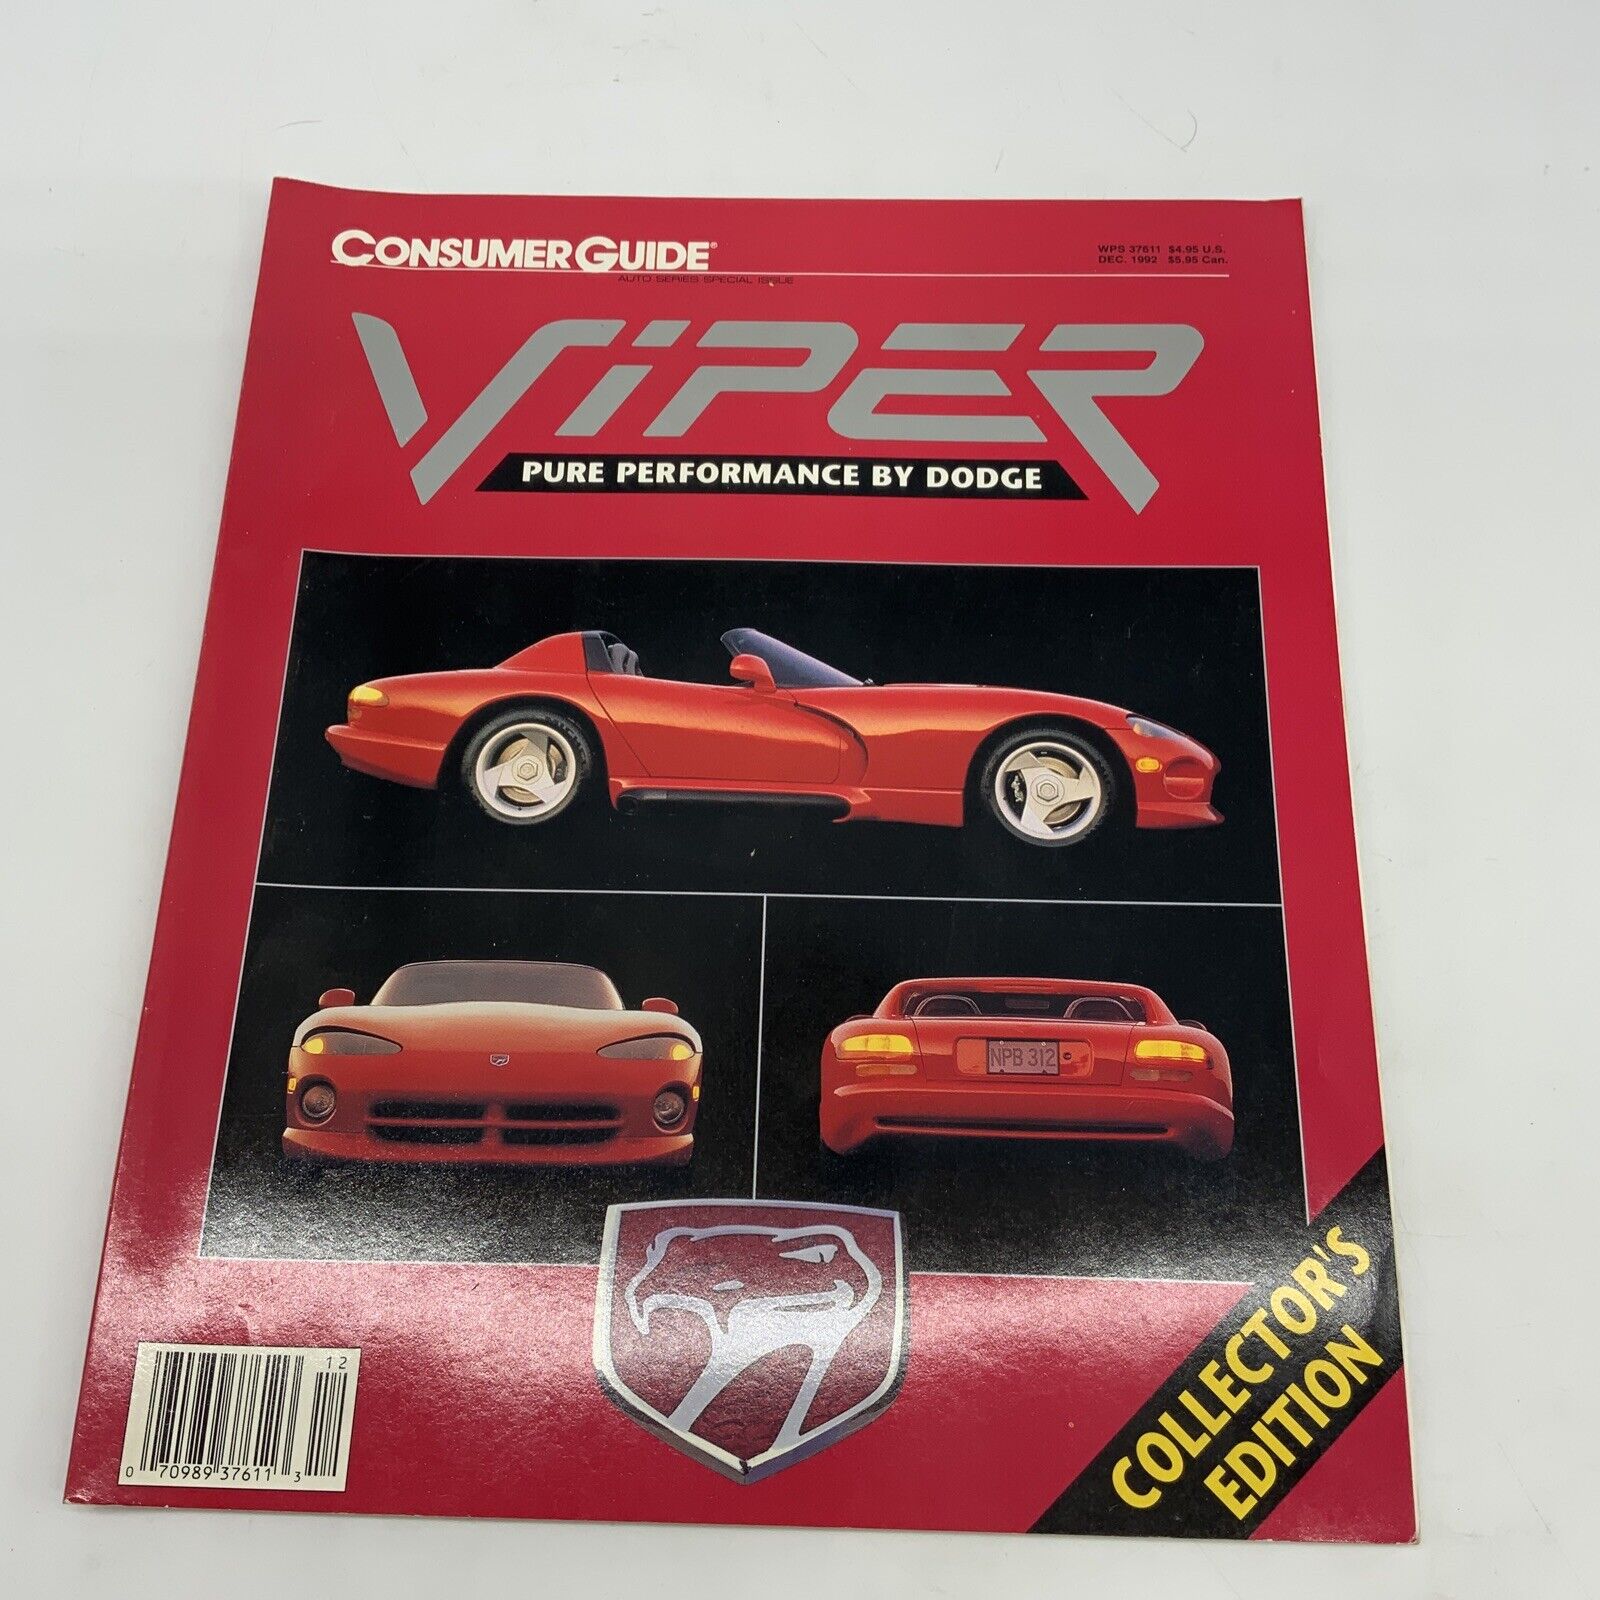 Viper: Pure Performance by Dodge by Consumer Goods 1992 07098937611